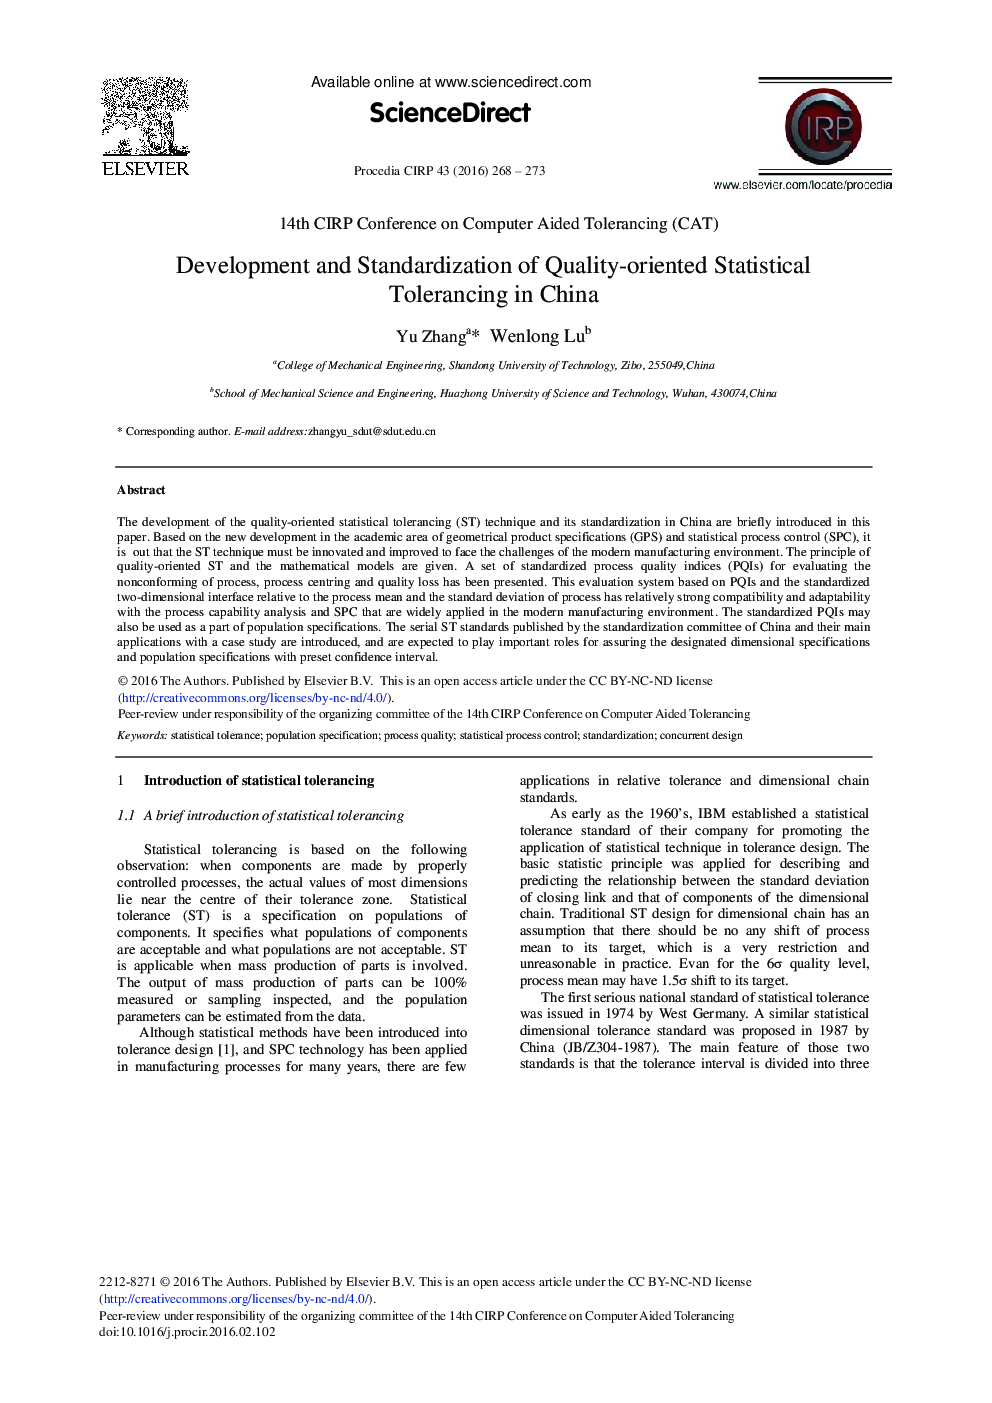 Development and Standardization of Quality-oriented Statistical Tolerancing in China 